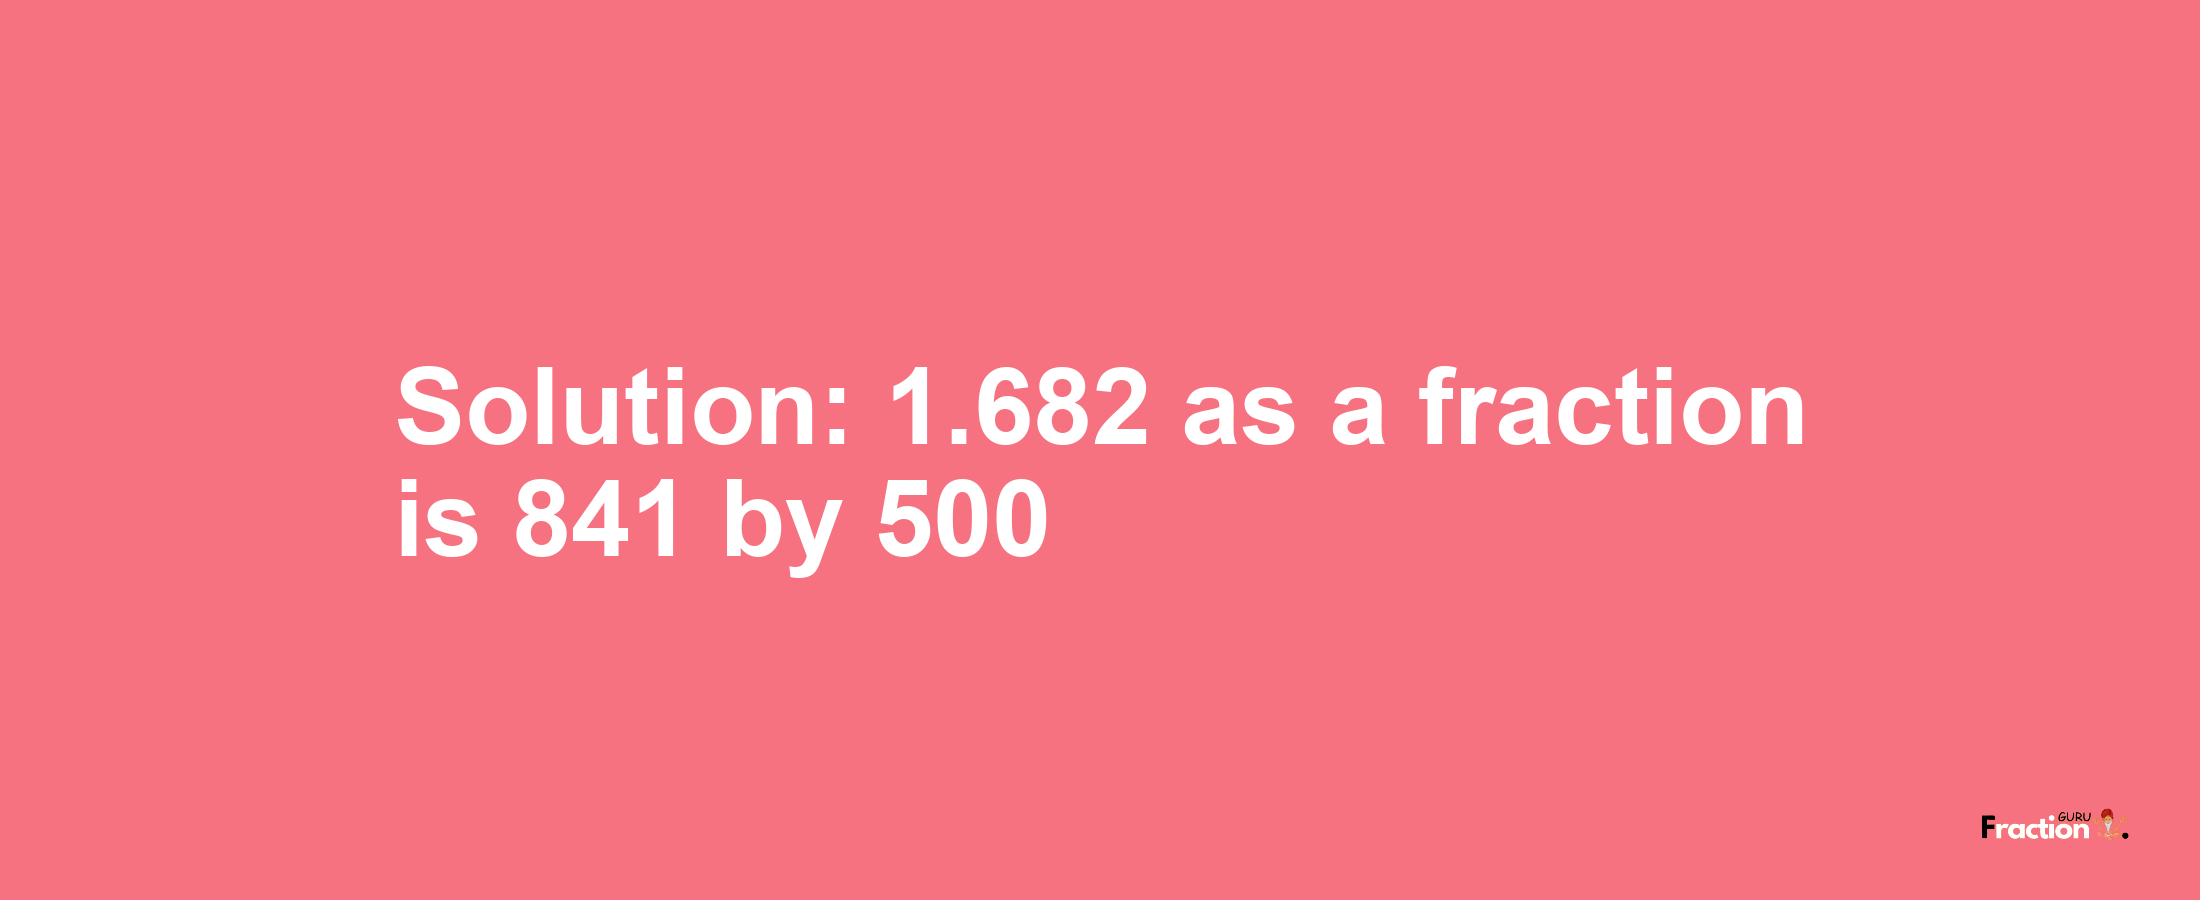 Solution:1.682 as a fraction is 841/500